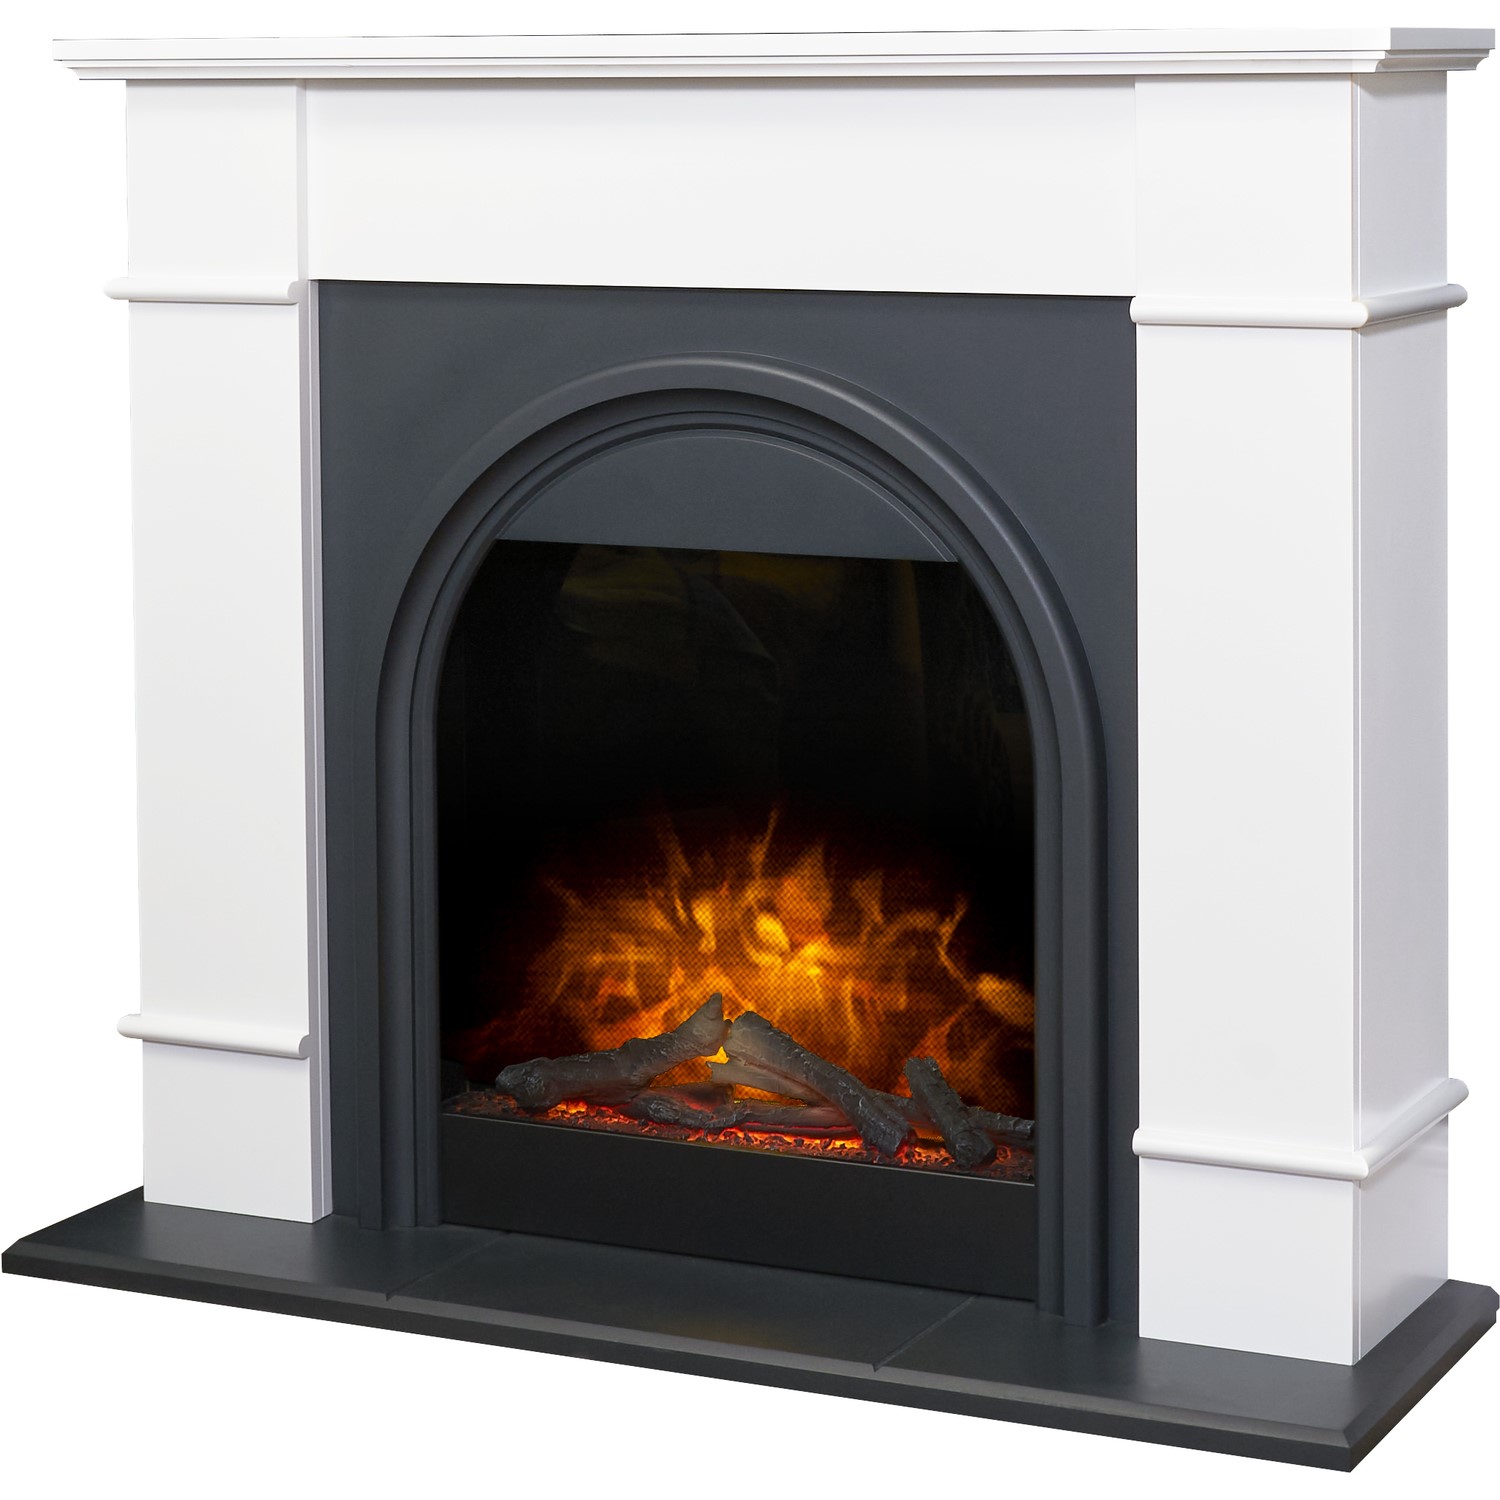 Read more about Adam white and grey electric fireplace suite 44 chesterfield